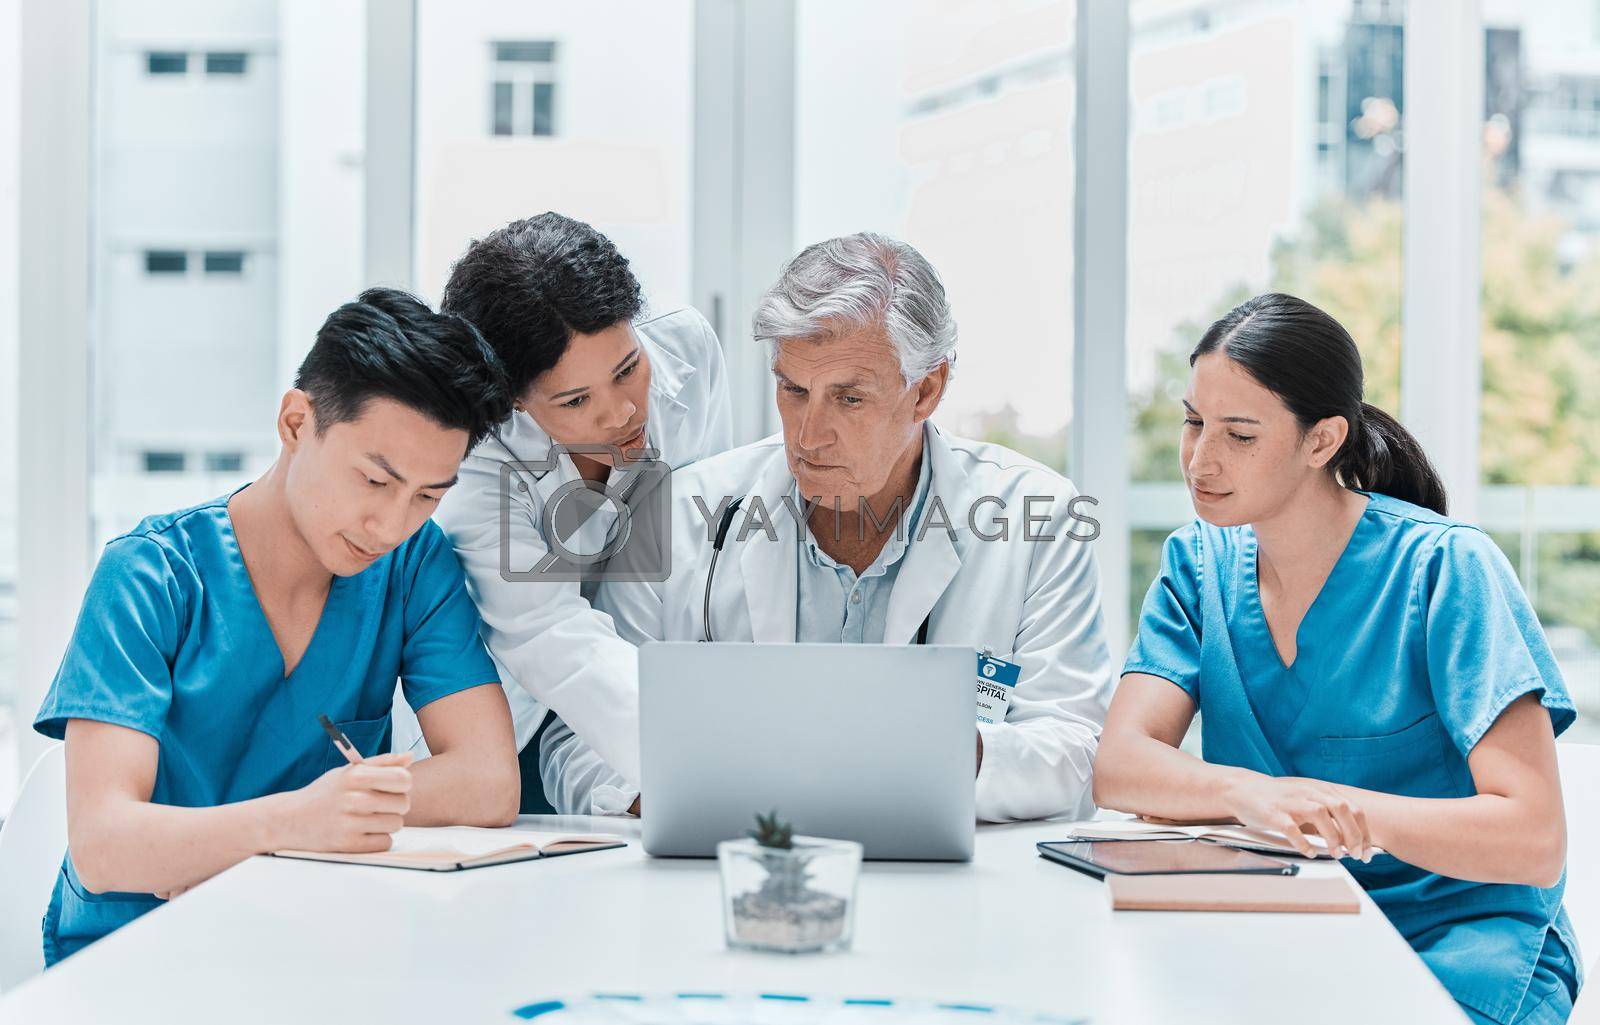 Royalty free image of Developing healthcare and medicine as a cooperative science. a group of medical practitioners working together on a laptop in a medical office. by YuriArcurs